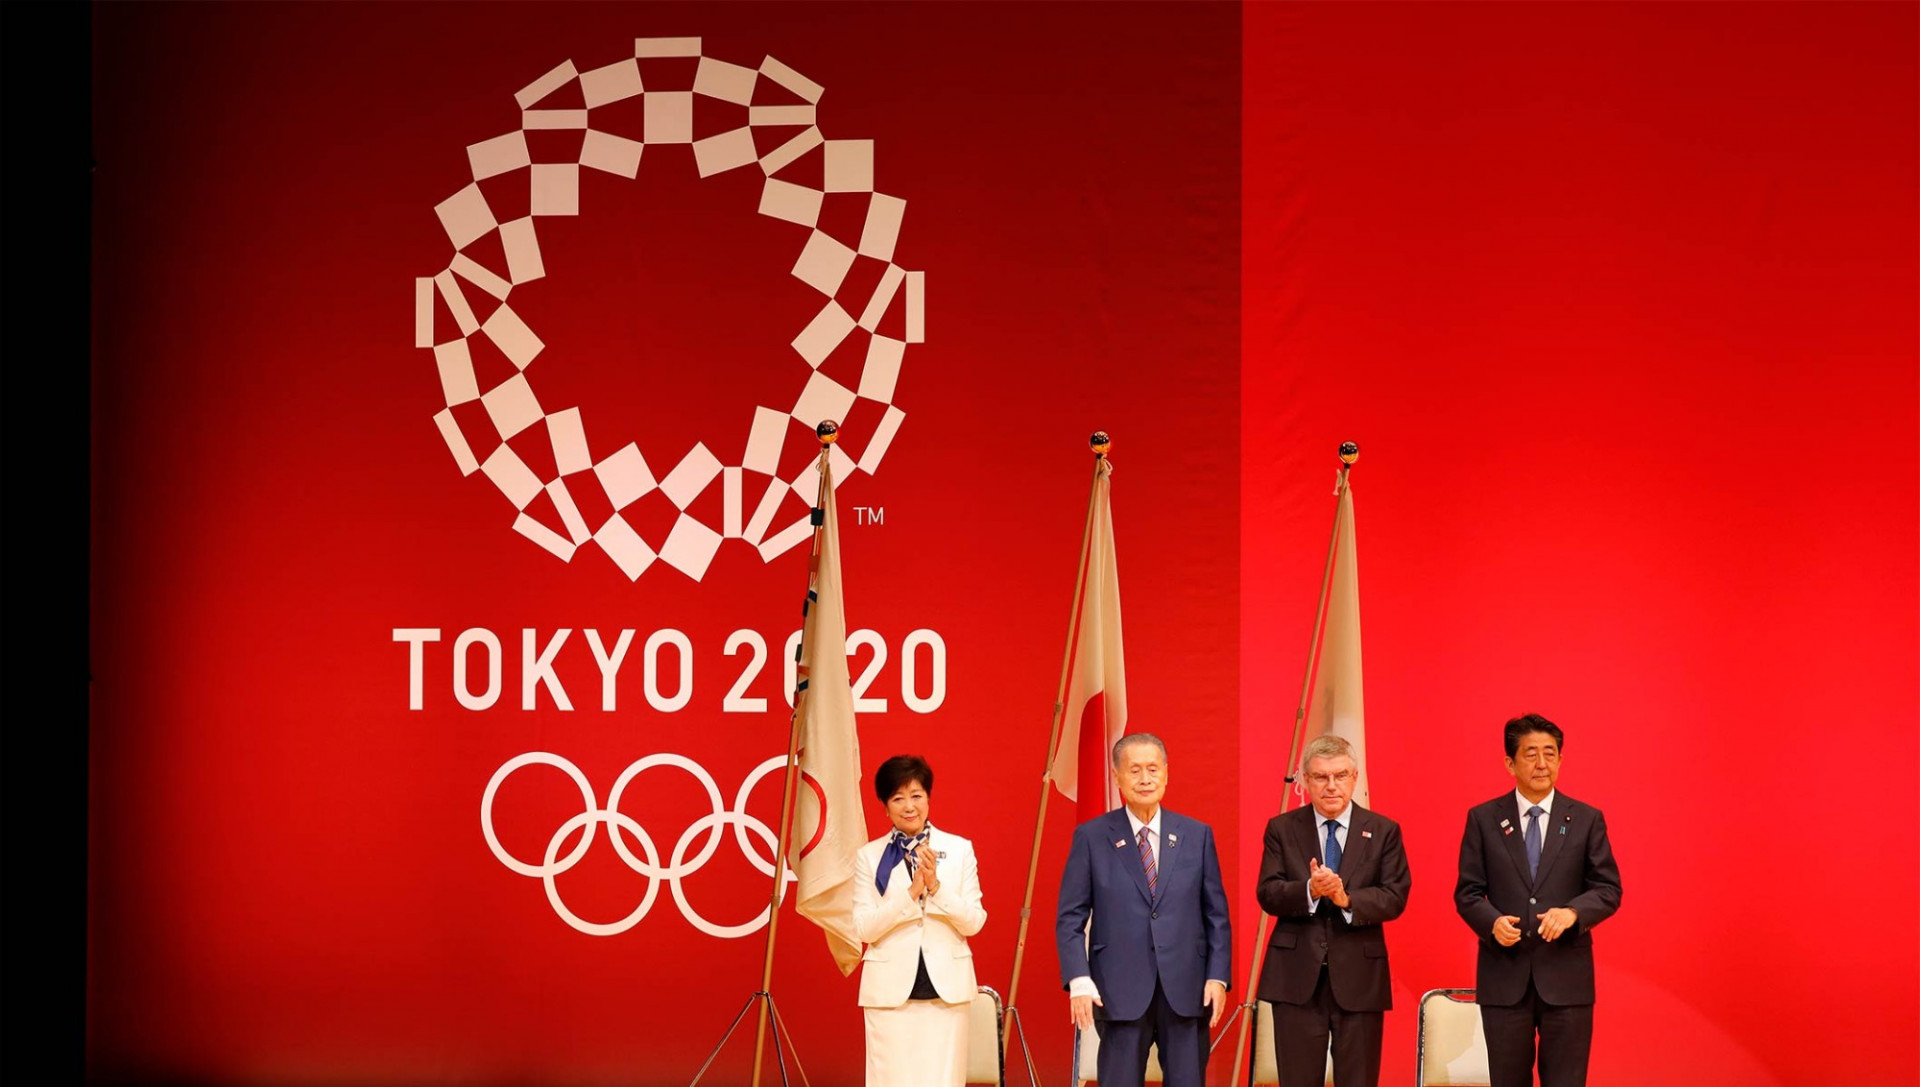 IOC invites Olympic athletes of the world to Tokyo-2020 with "One year to go"